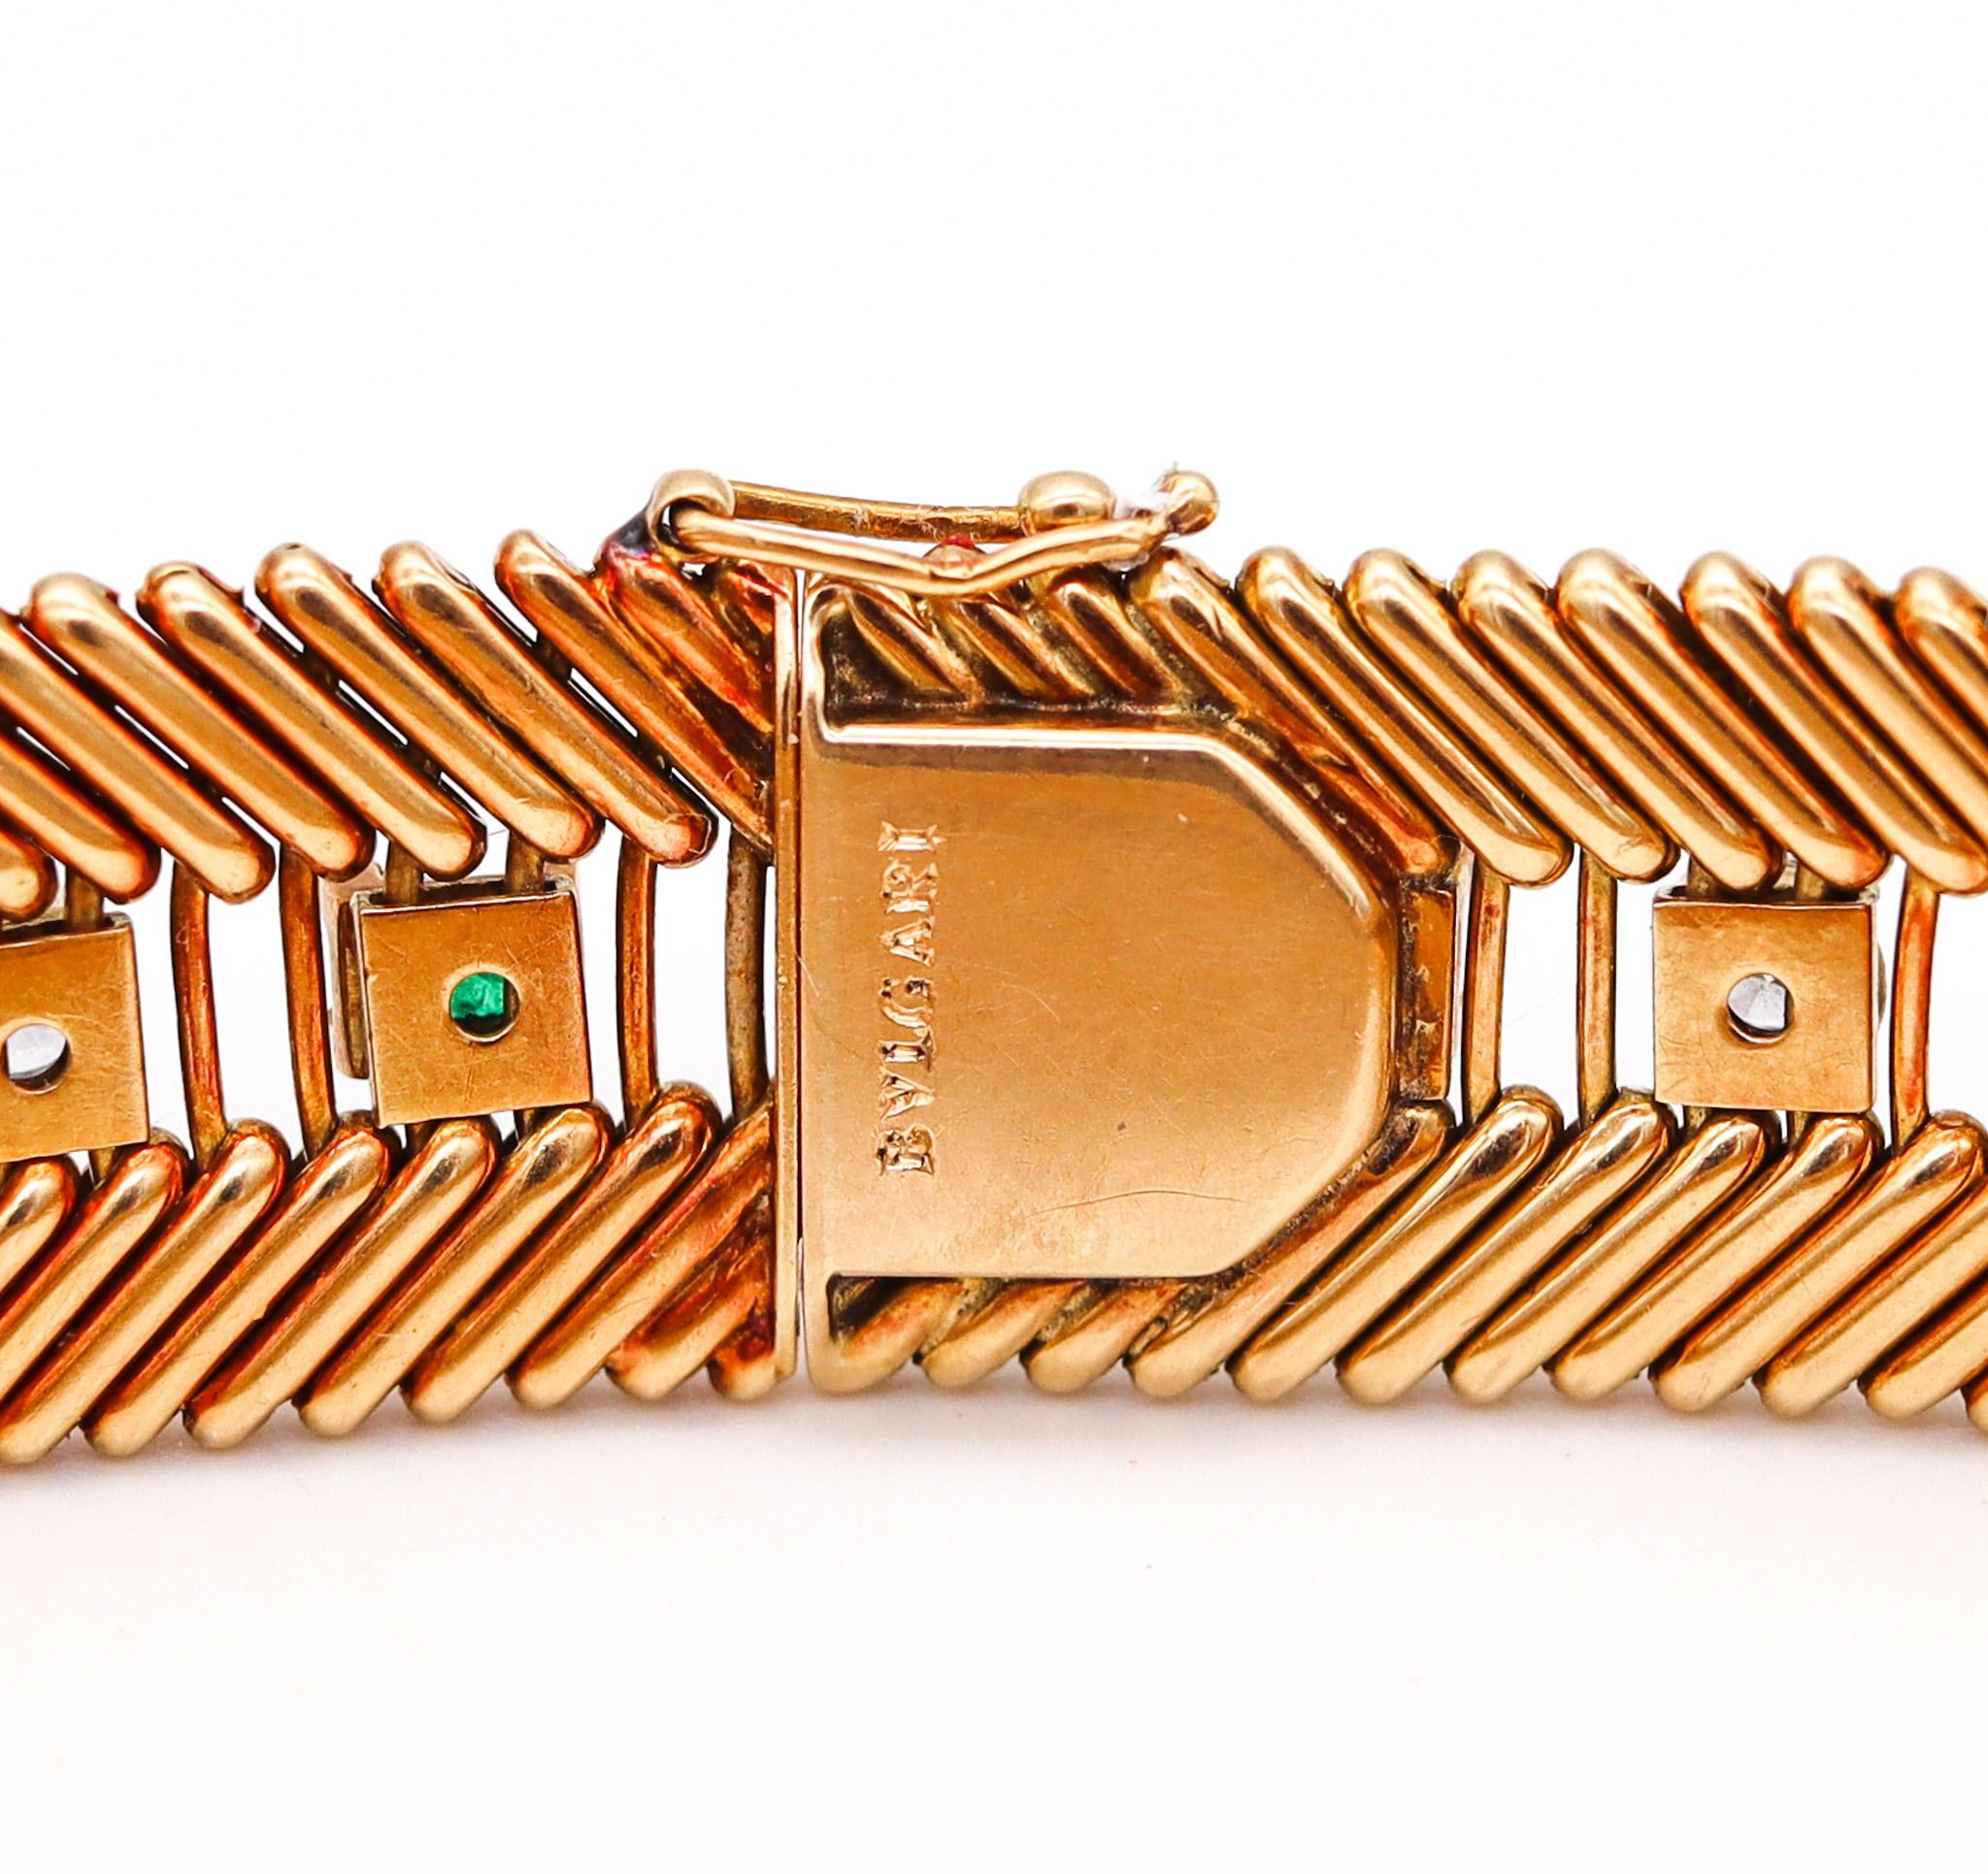 Brilliant Cut Bvlgari Milano 1950 Bracelet in 18k Gold with 5.88ctw in Emerald and Diamonds For Sale